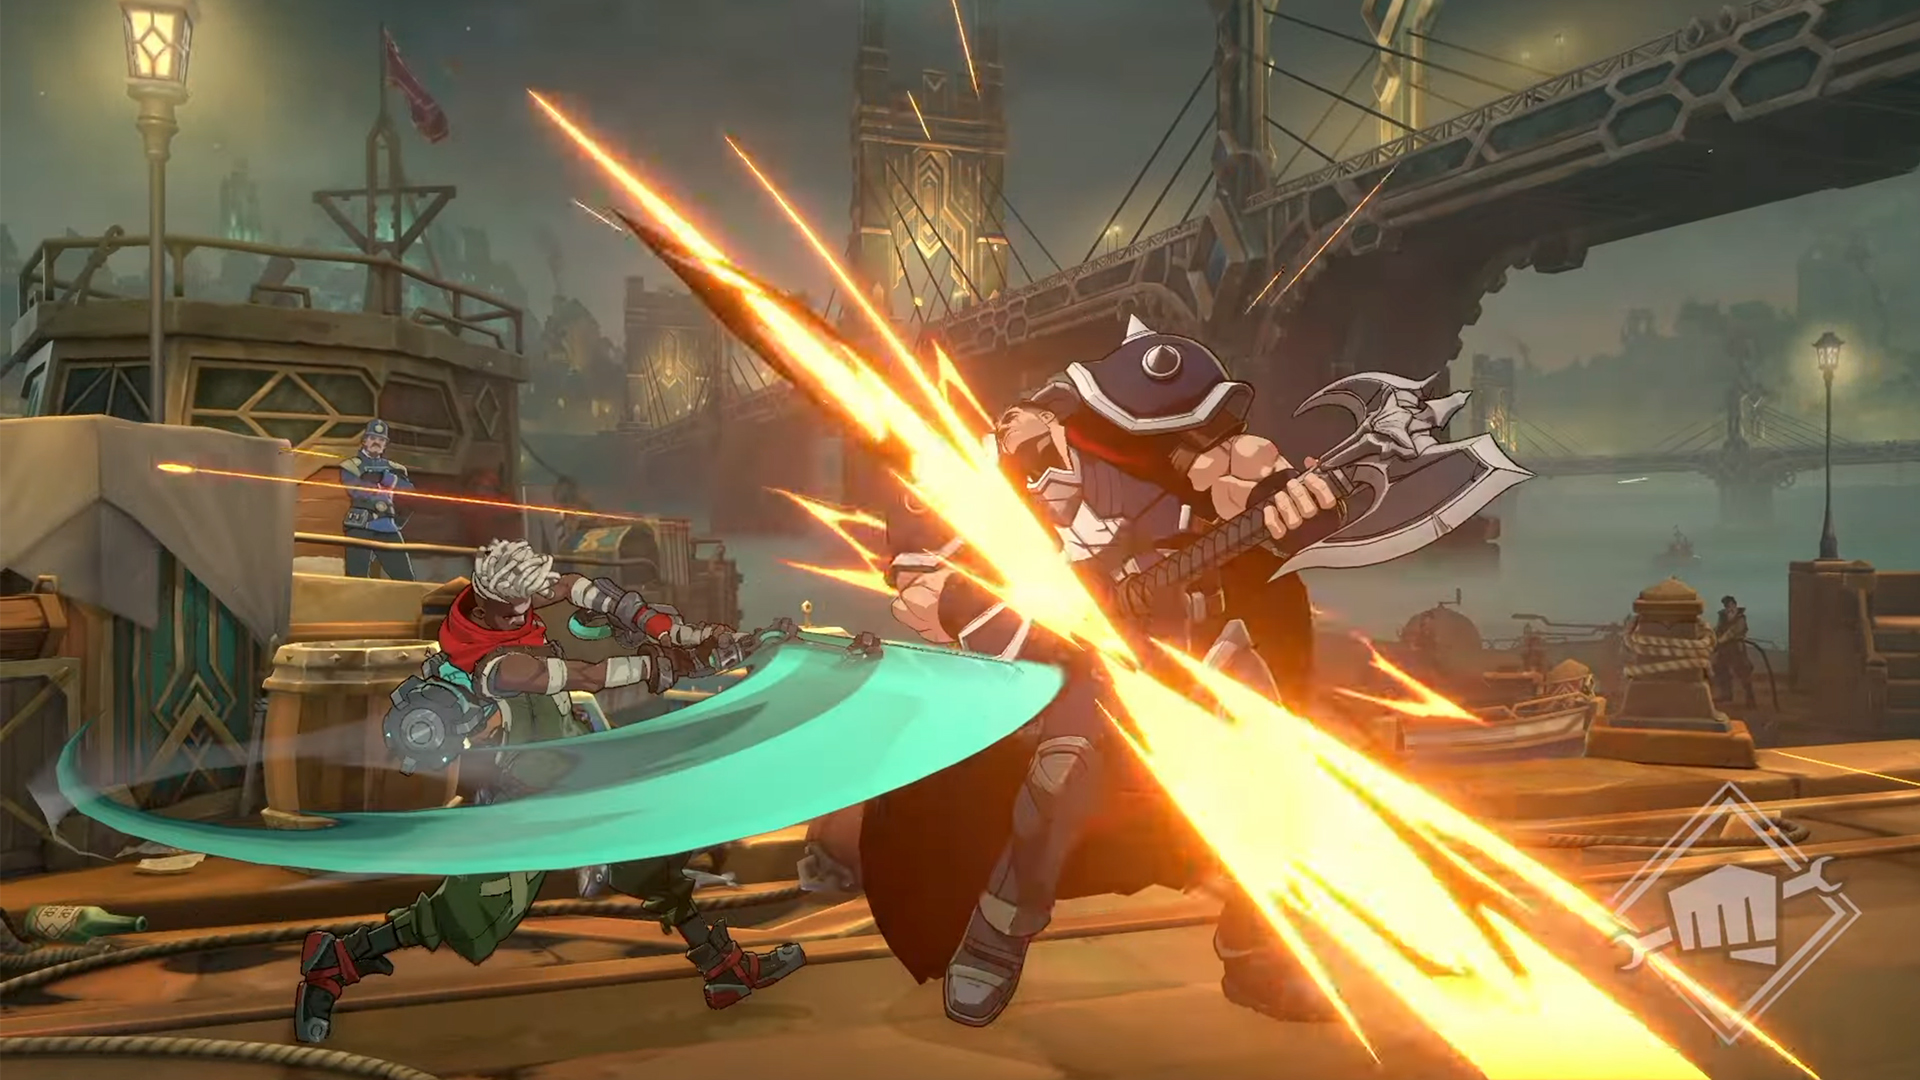 Ekko and Darius battle in a still from Project L, Riot Games’ League of Legends fighting game